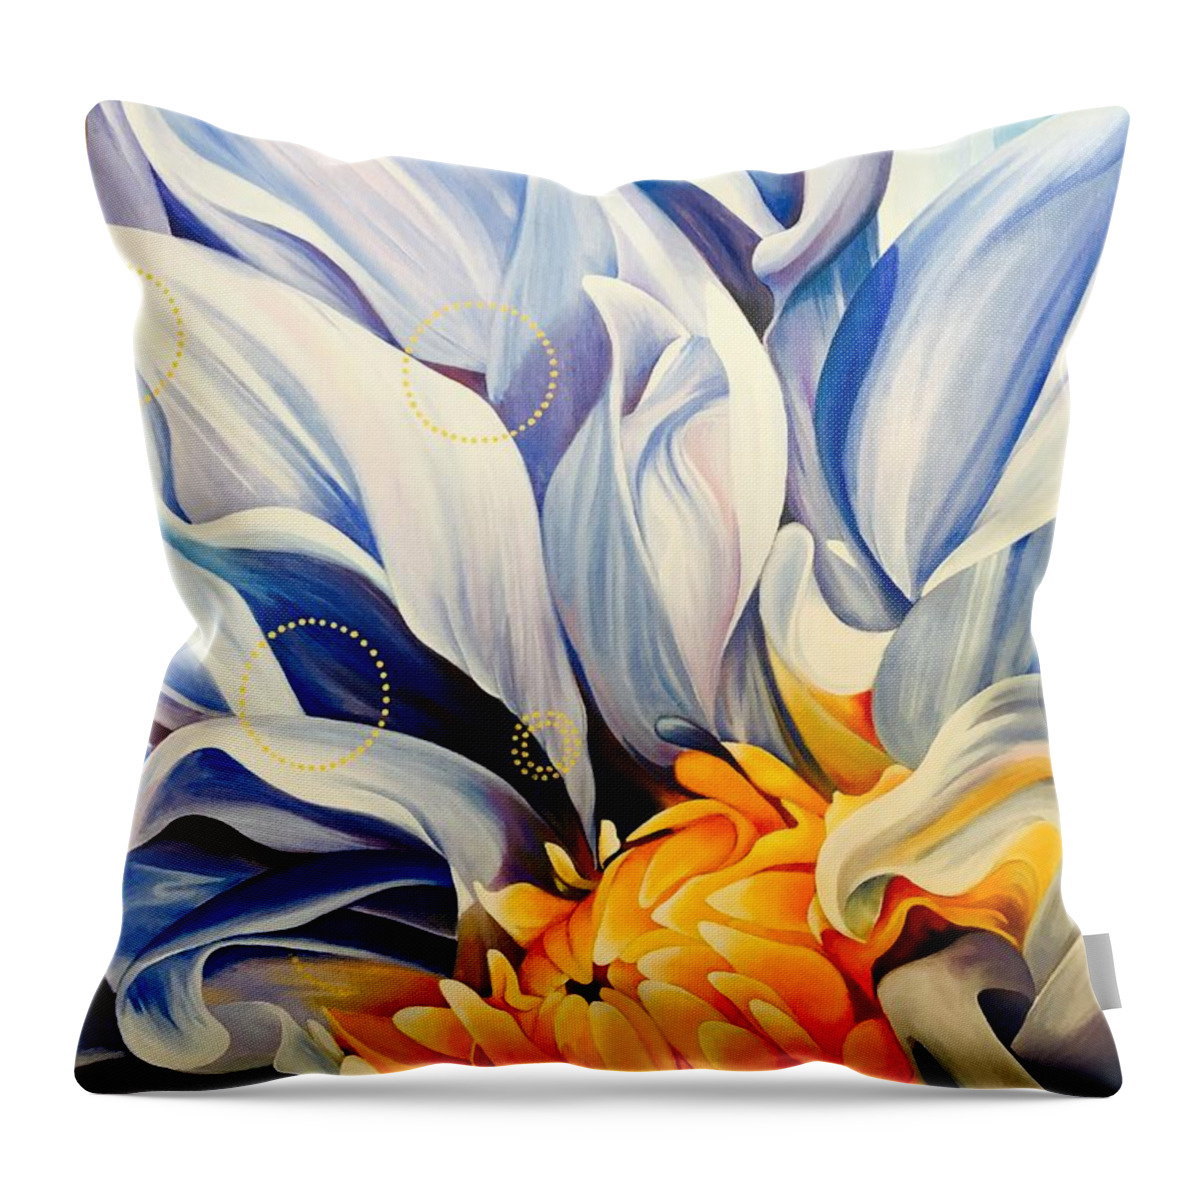 Flower Throw Pillow featuring the painting Blue and orange flower by Sharon Hulme